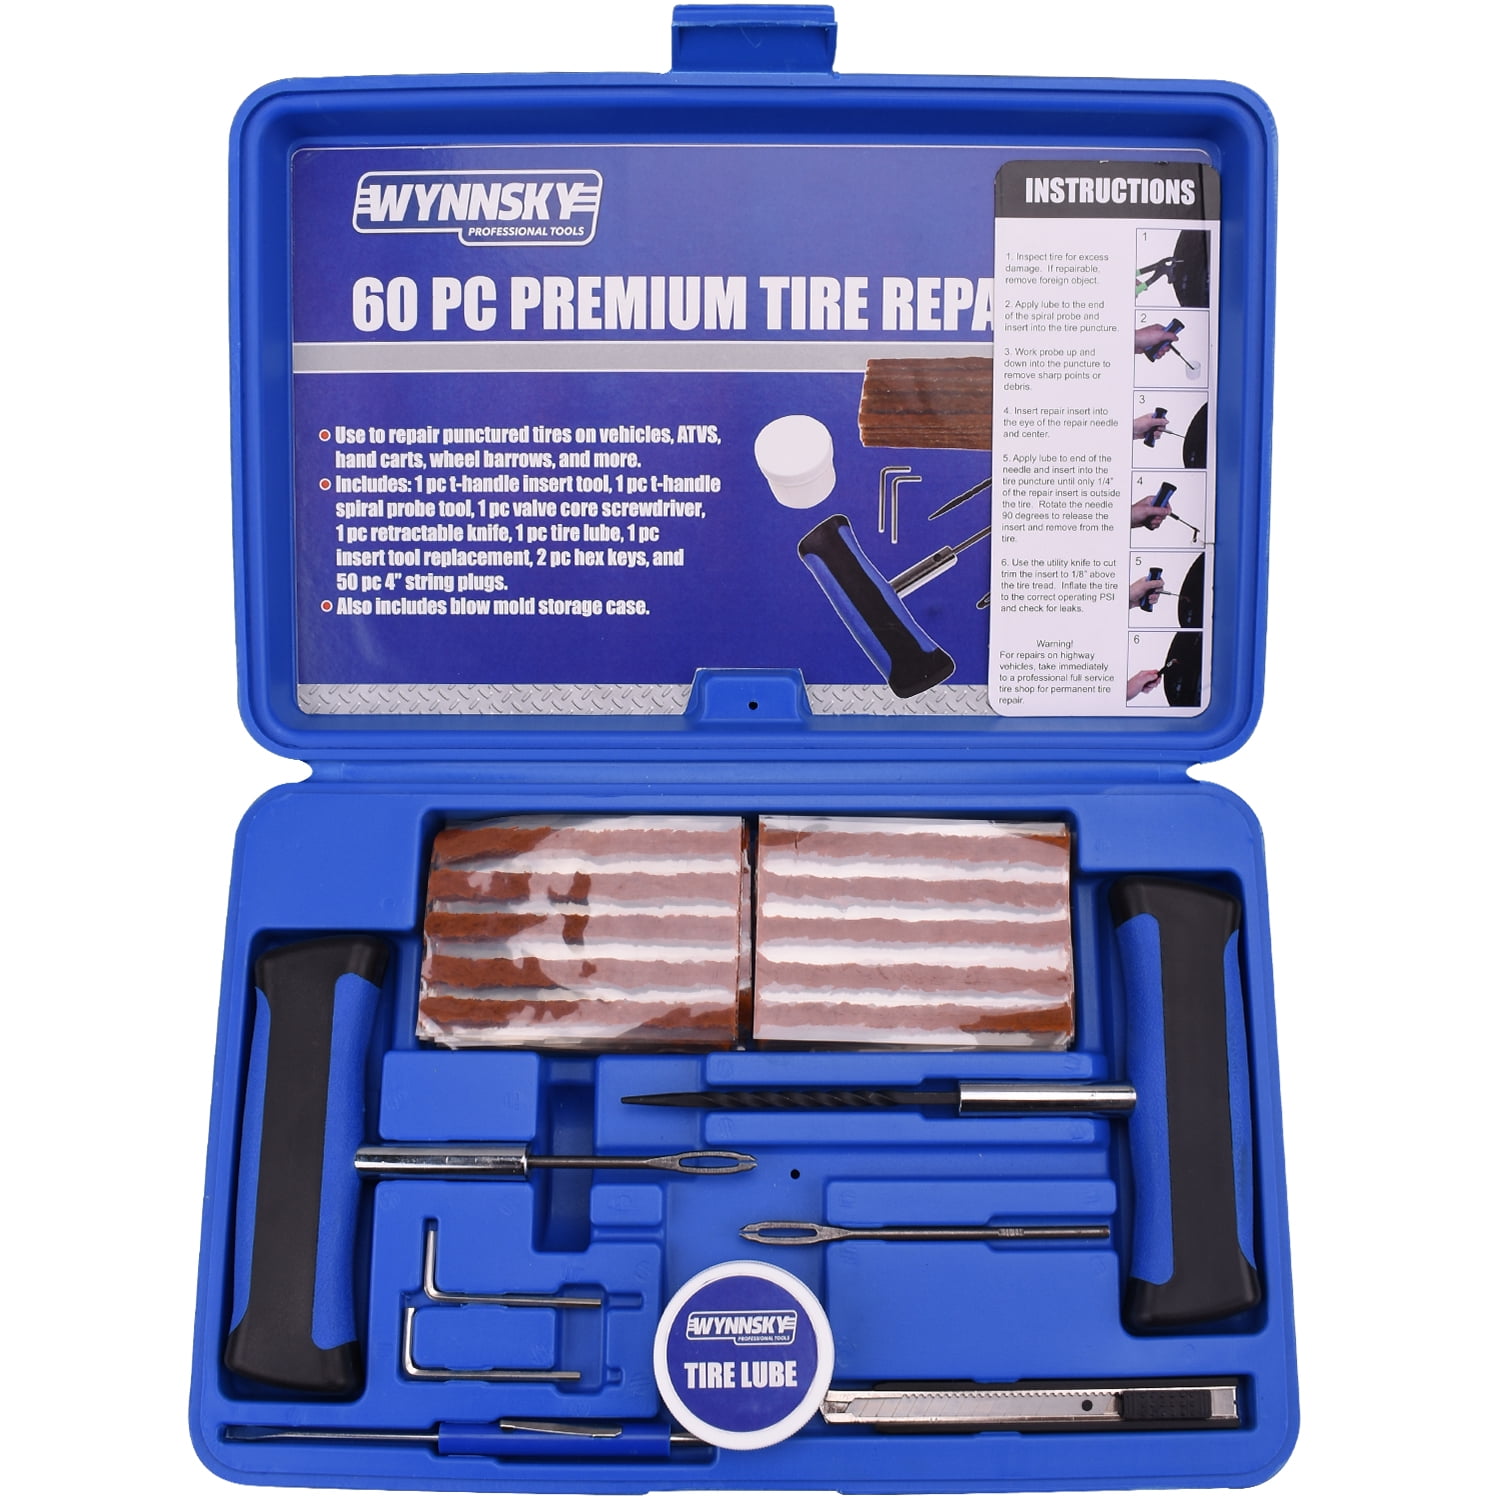 BETOOLL Tire Repair Kit 22 Pcs for Car Motorcycle ATV Jeep Truck Tractor FL for sale online 